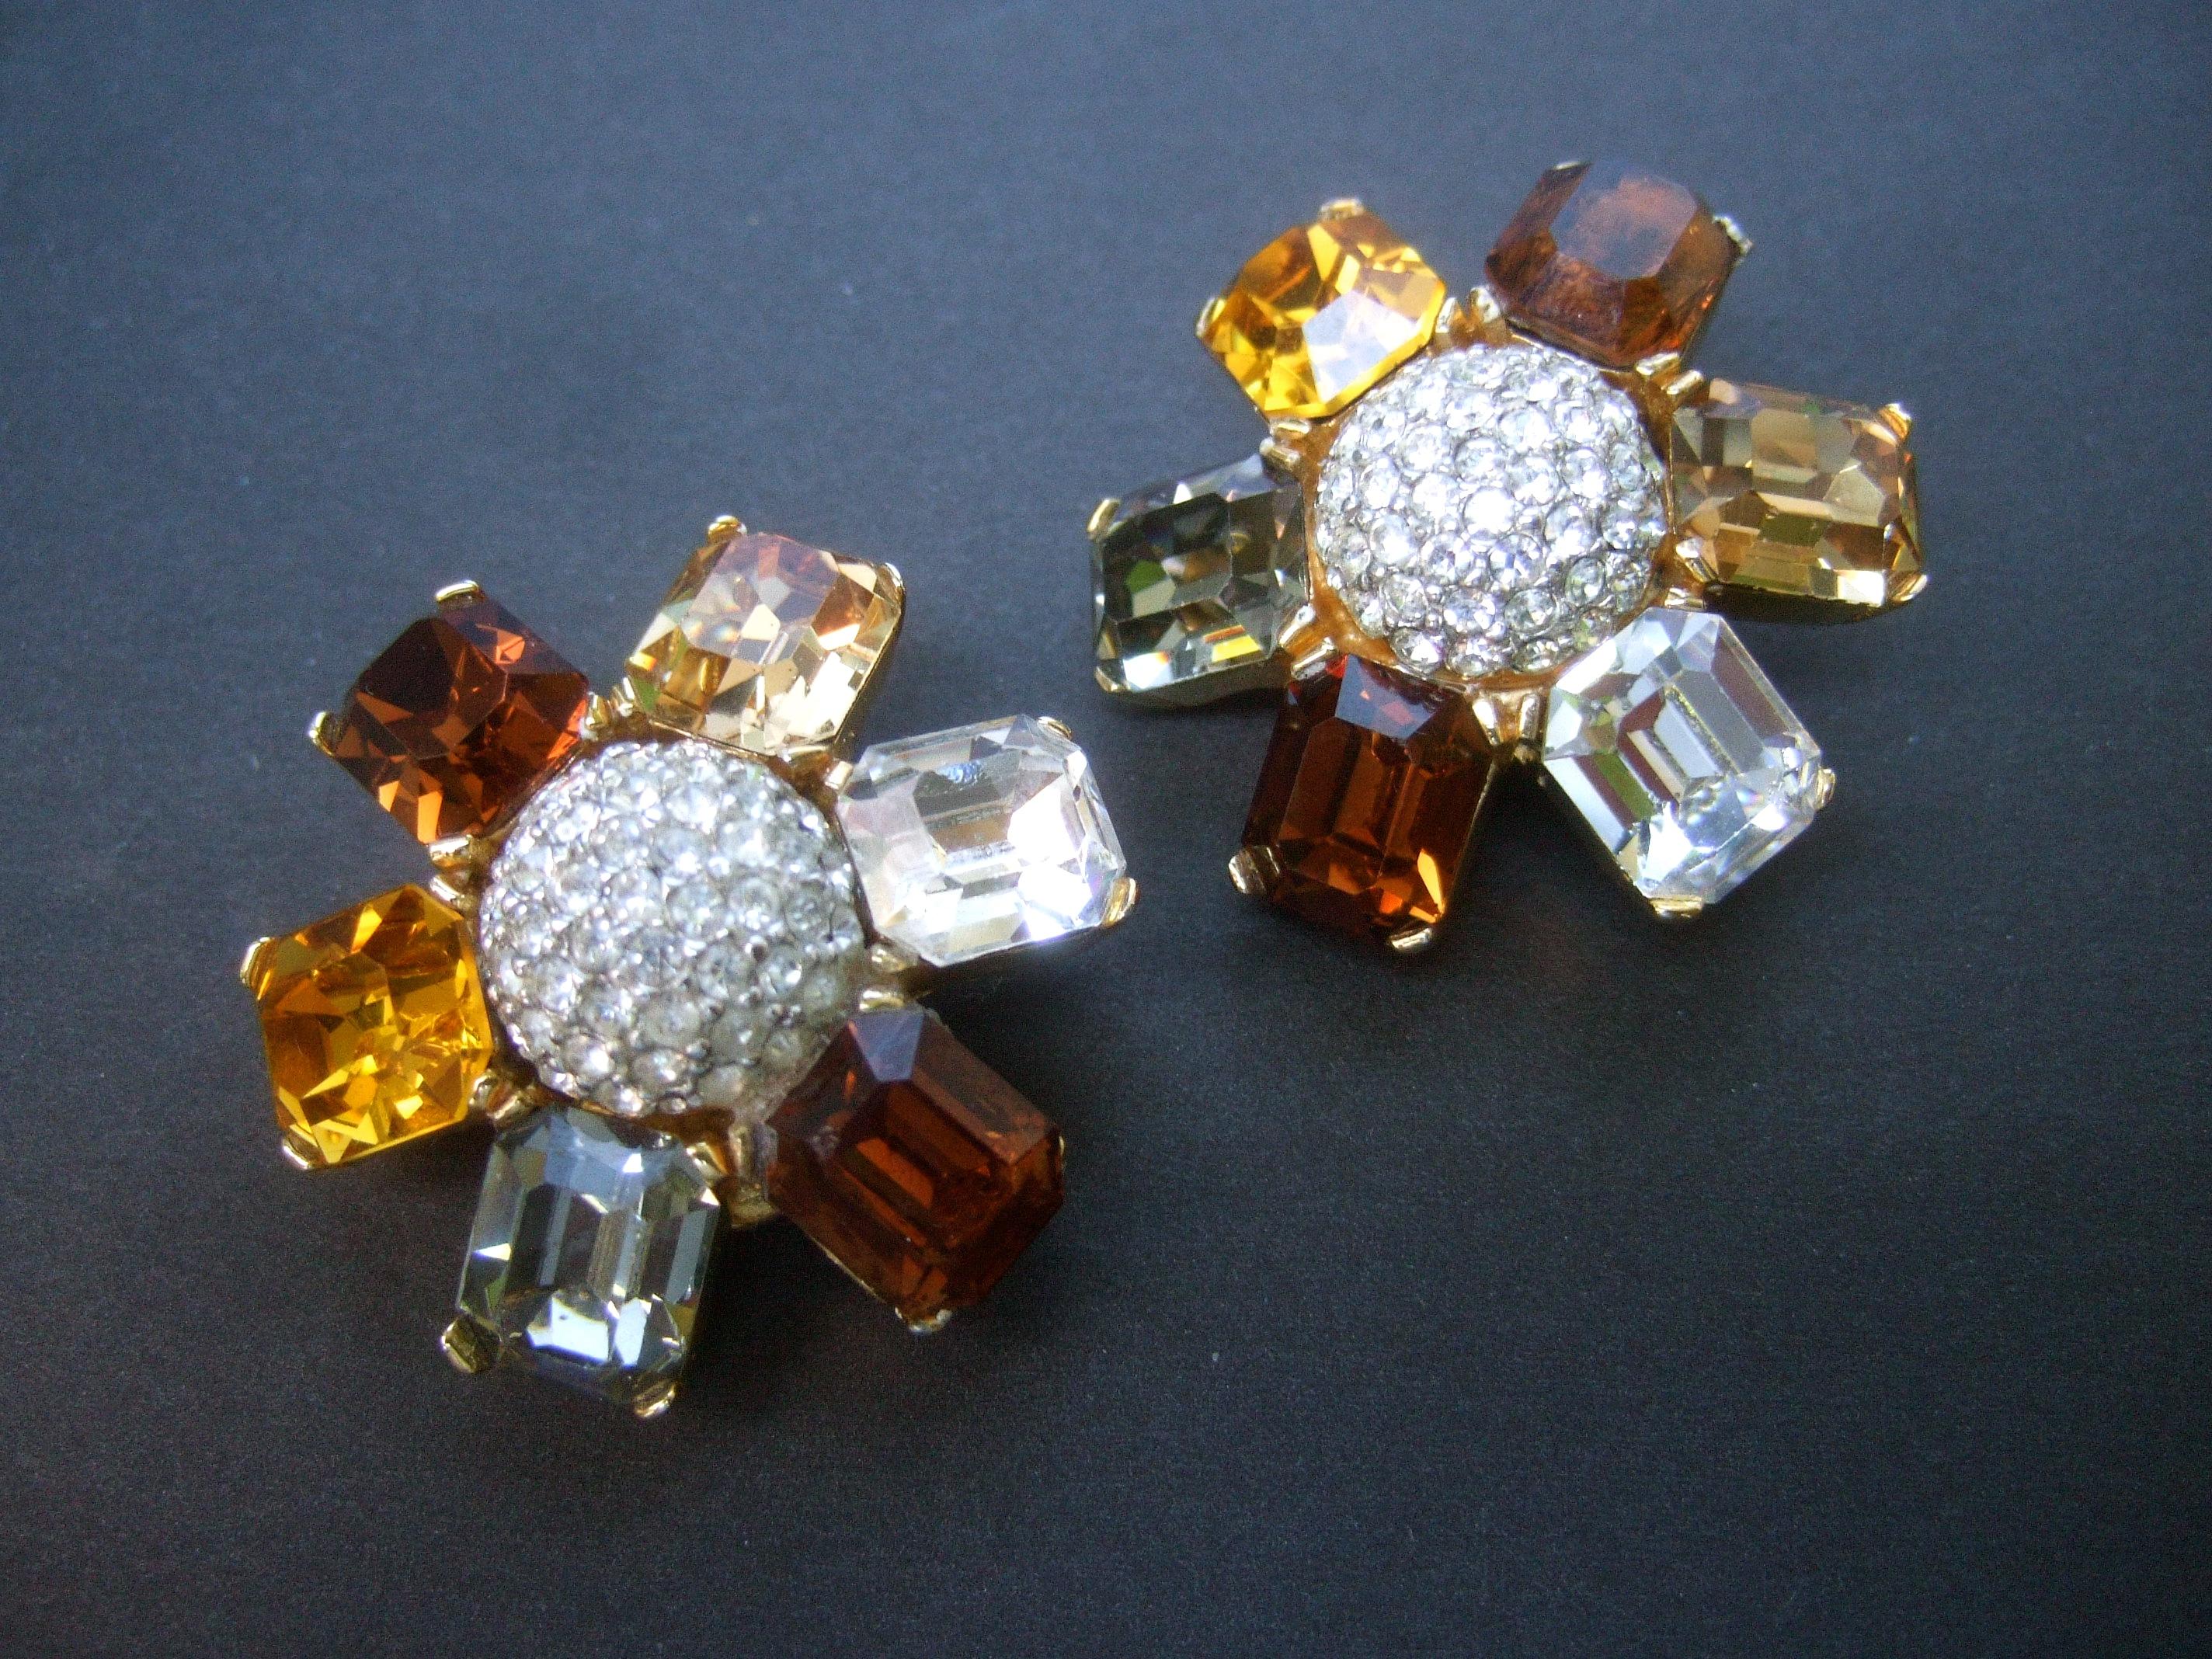 Ciner Autumn crystal large scale clip on floral earrings c 1980
The elegant designer earrings are embellished 
with six rectangular prong set crystals in a myriad 
of colors; ranging from golden amber, smokey brown,
gray and clear  

The center of